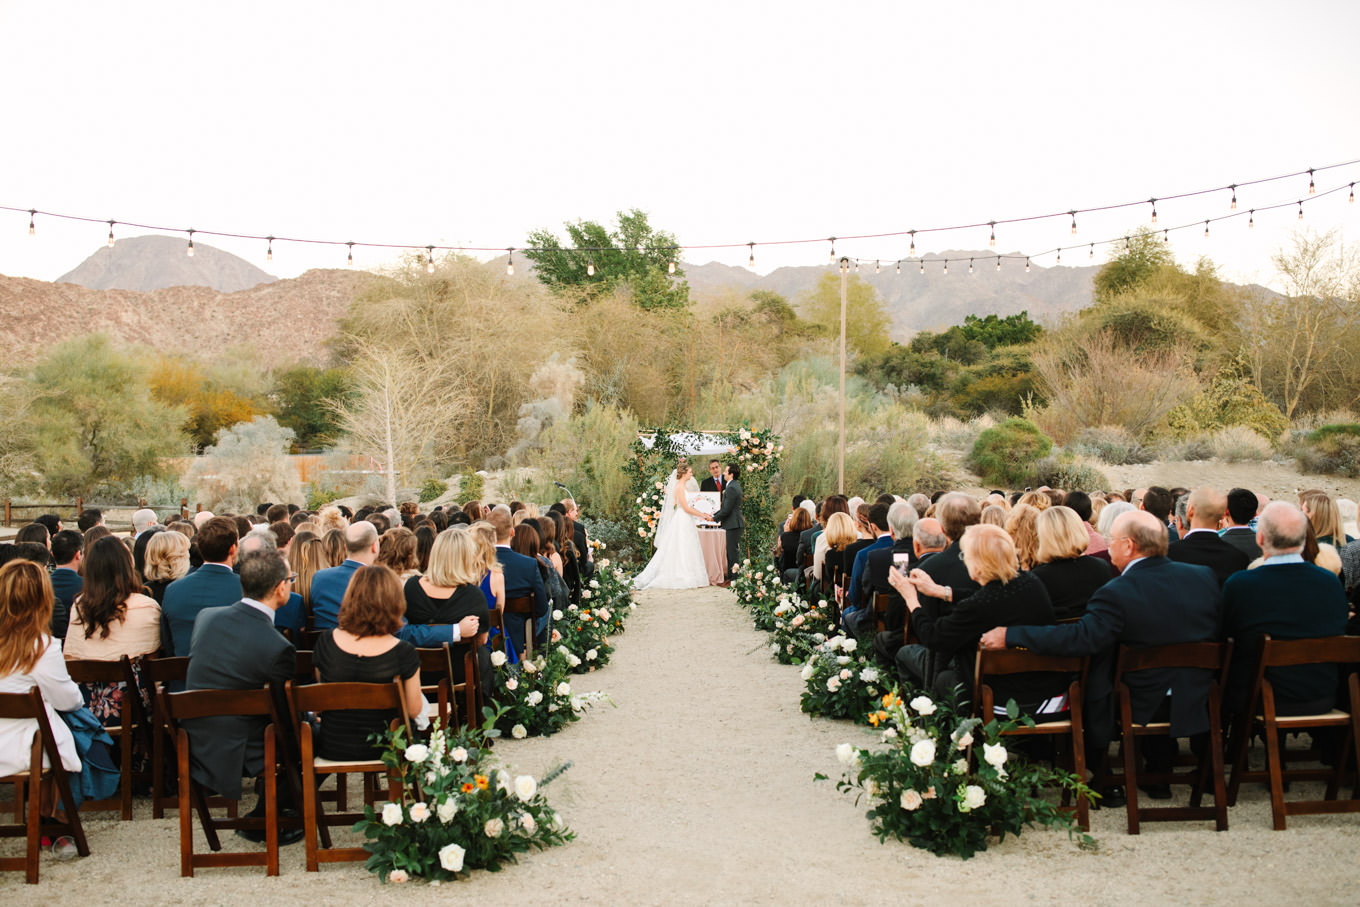 Wedding ceremony at sunset | Living Desert Zoo & Gardens wedding with unique details | Elevated and colorful wedding photography for fun-loving couples in Southern California |  #PalmSprings #palmspringsphotographer #gardenwedding #palmspringswedding  Source: Mary Costa Photography | Los Angeles wedding photographer 